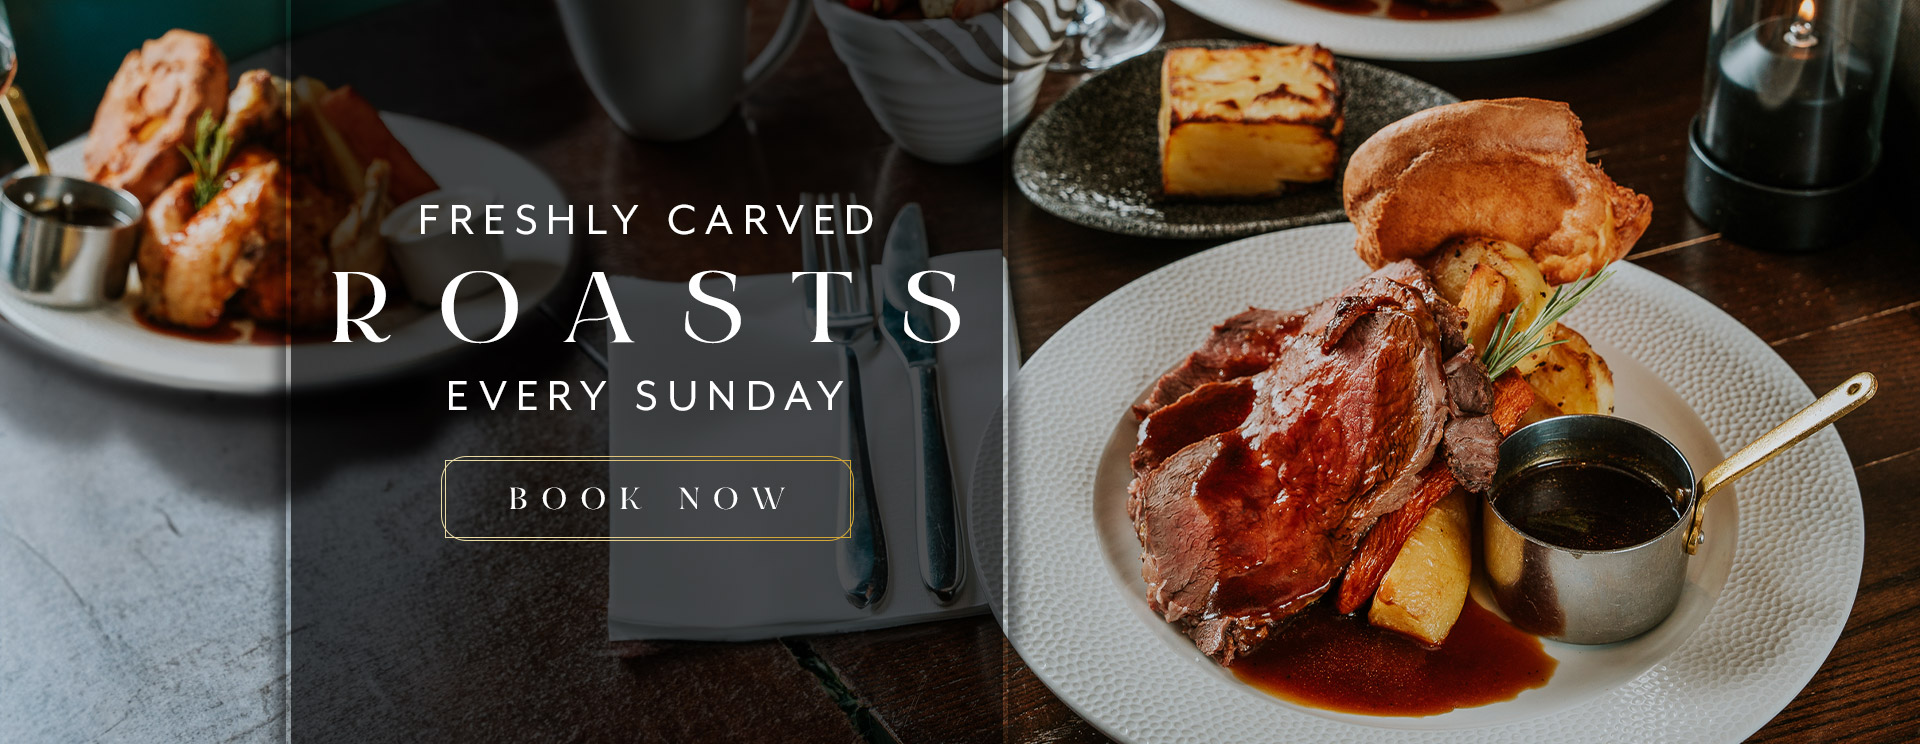 Sunday Lunch at The Fishery Inn